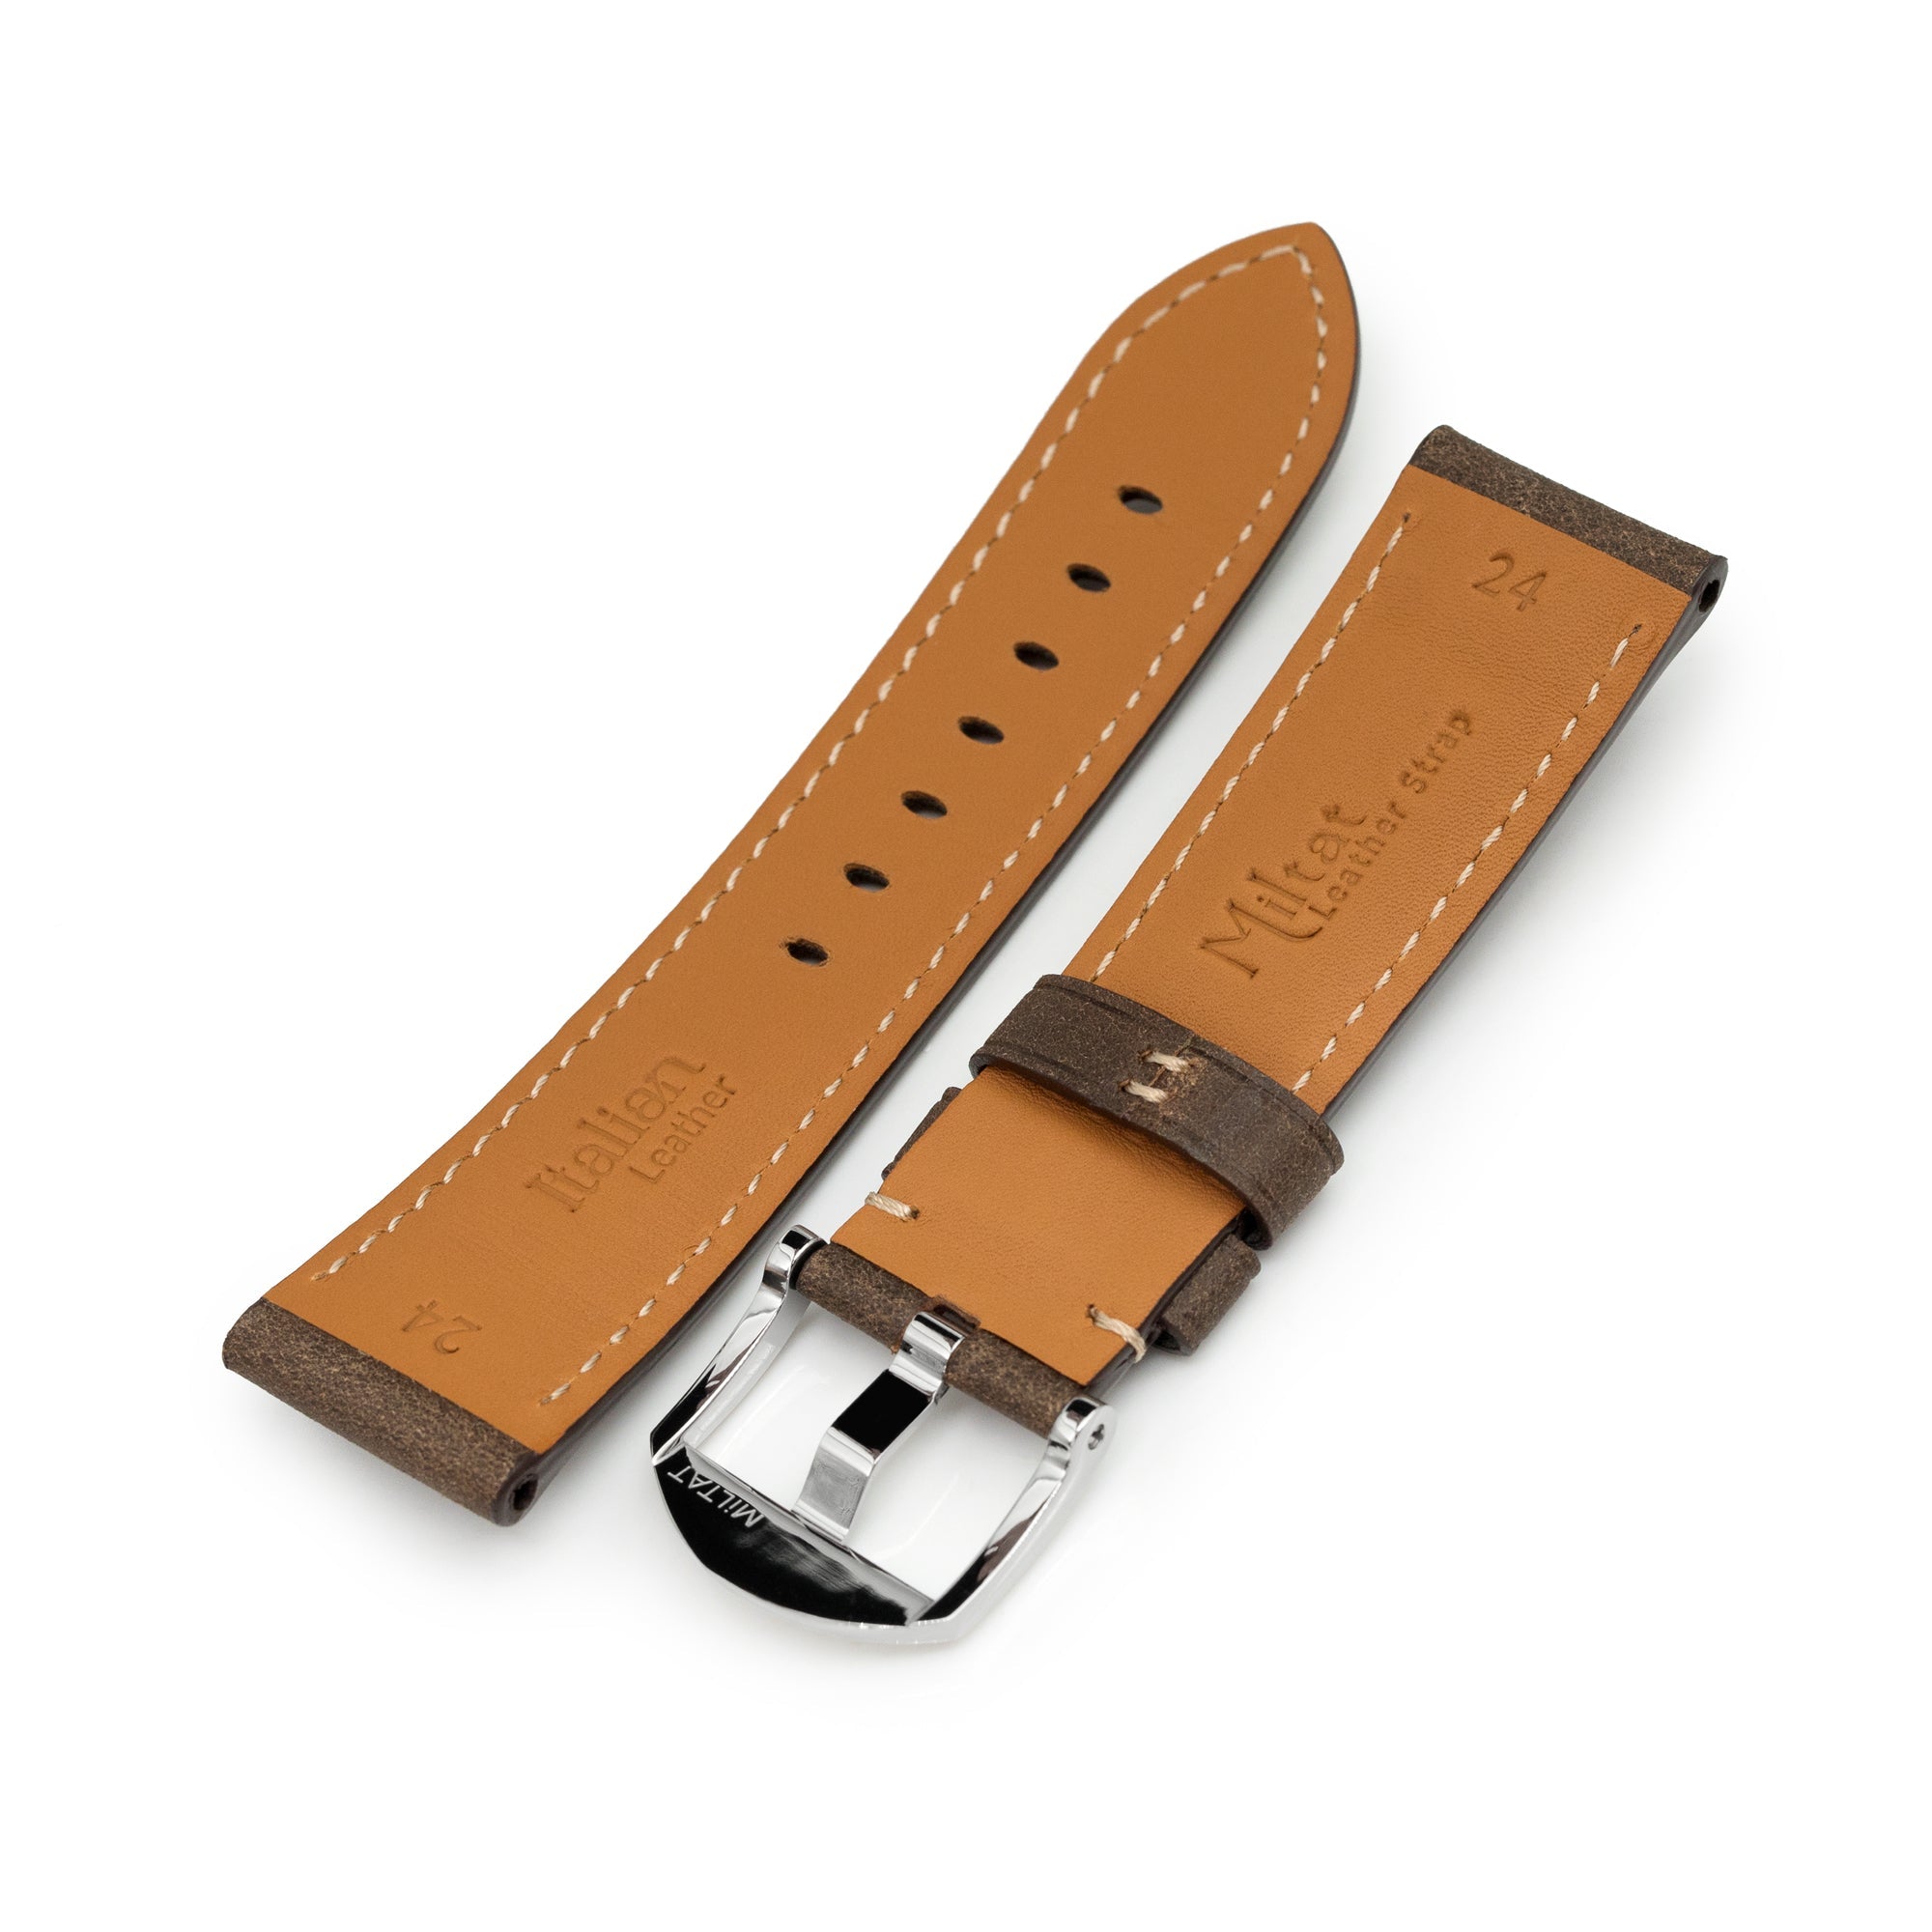 Pam Collection, Dark Brown Italian Leather Watch Strap for Panerai, Beige Stitching Strapcode watch bands